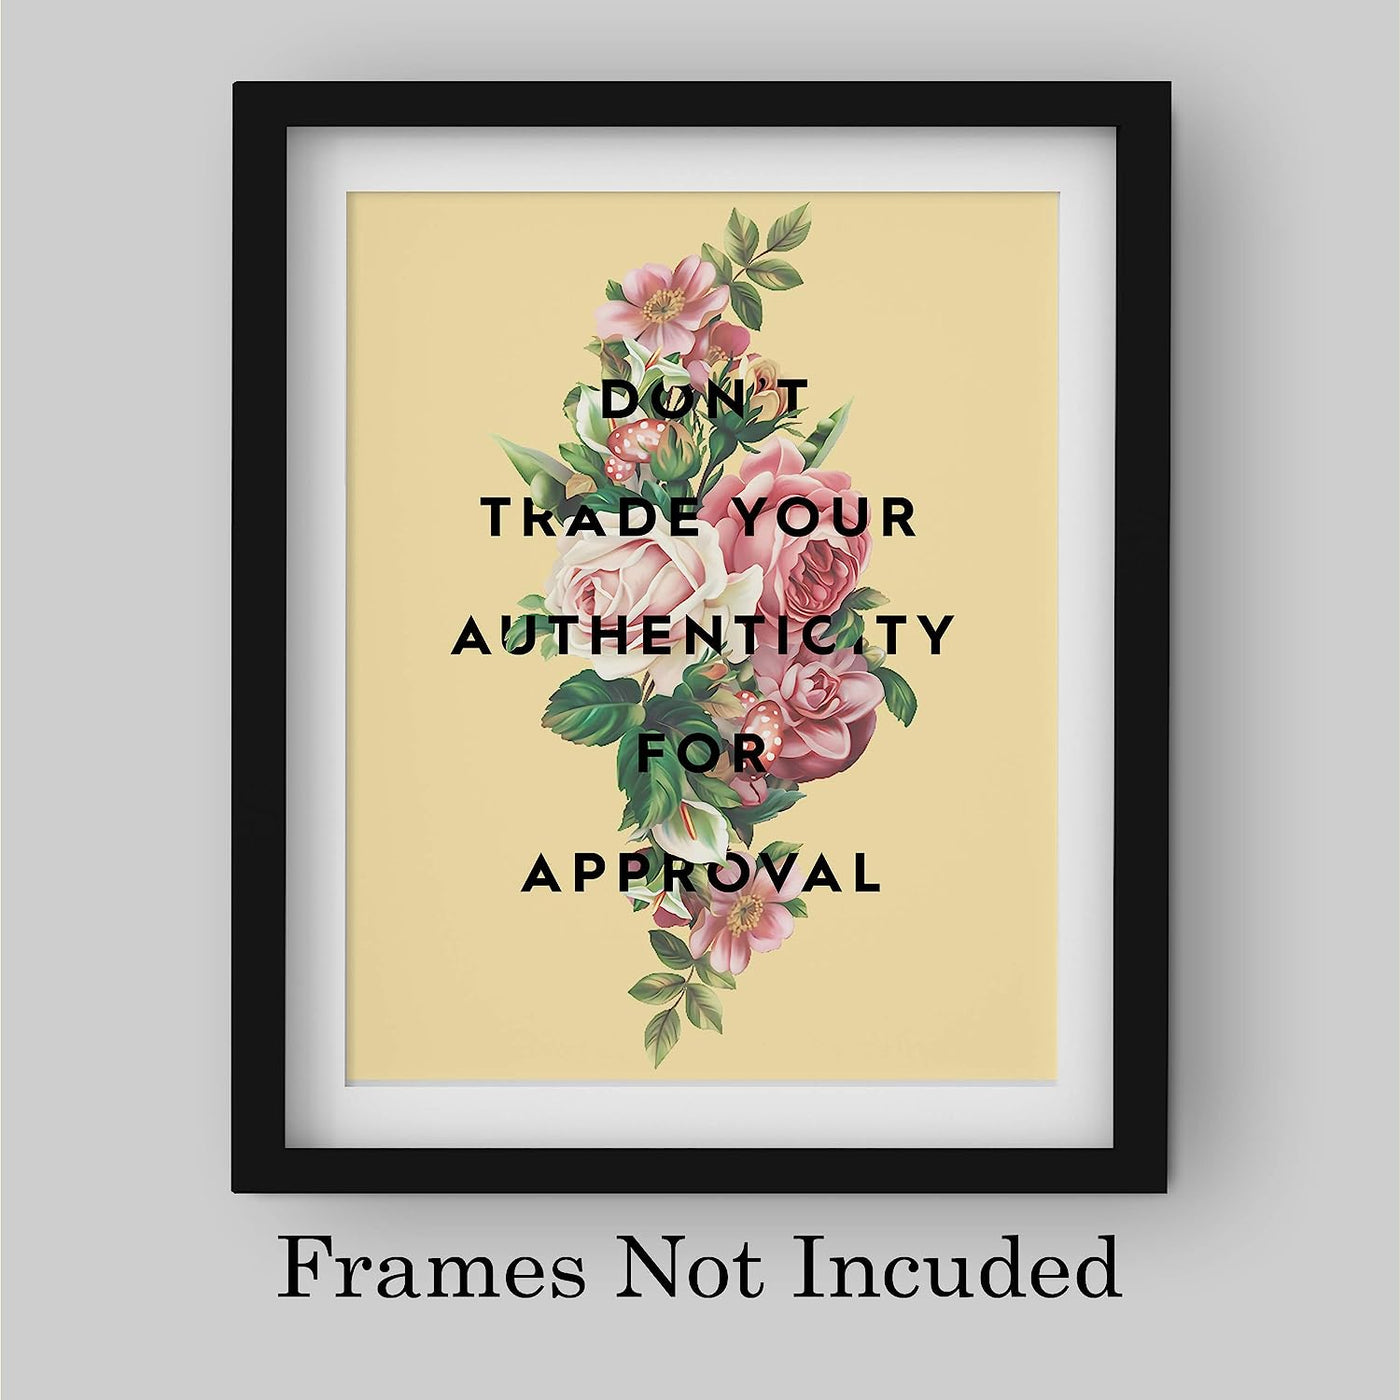 Don't Trade Your Authenticity for Approval Inspirational Quotes Wall Art -8 x 10" Abstract Floral Poster Print-Ready to Frame. Home-Office-School-Dorm Decor. Great Advice & Gift for Inspiration!